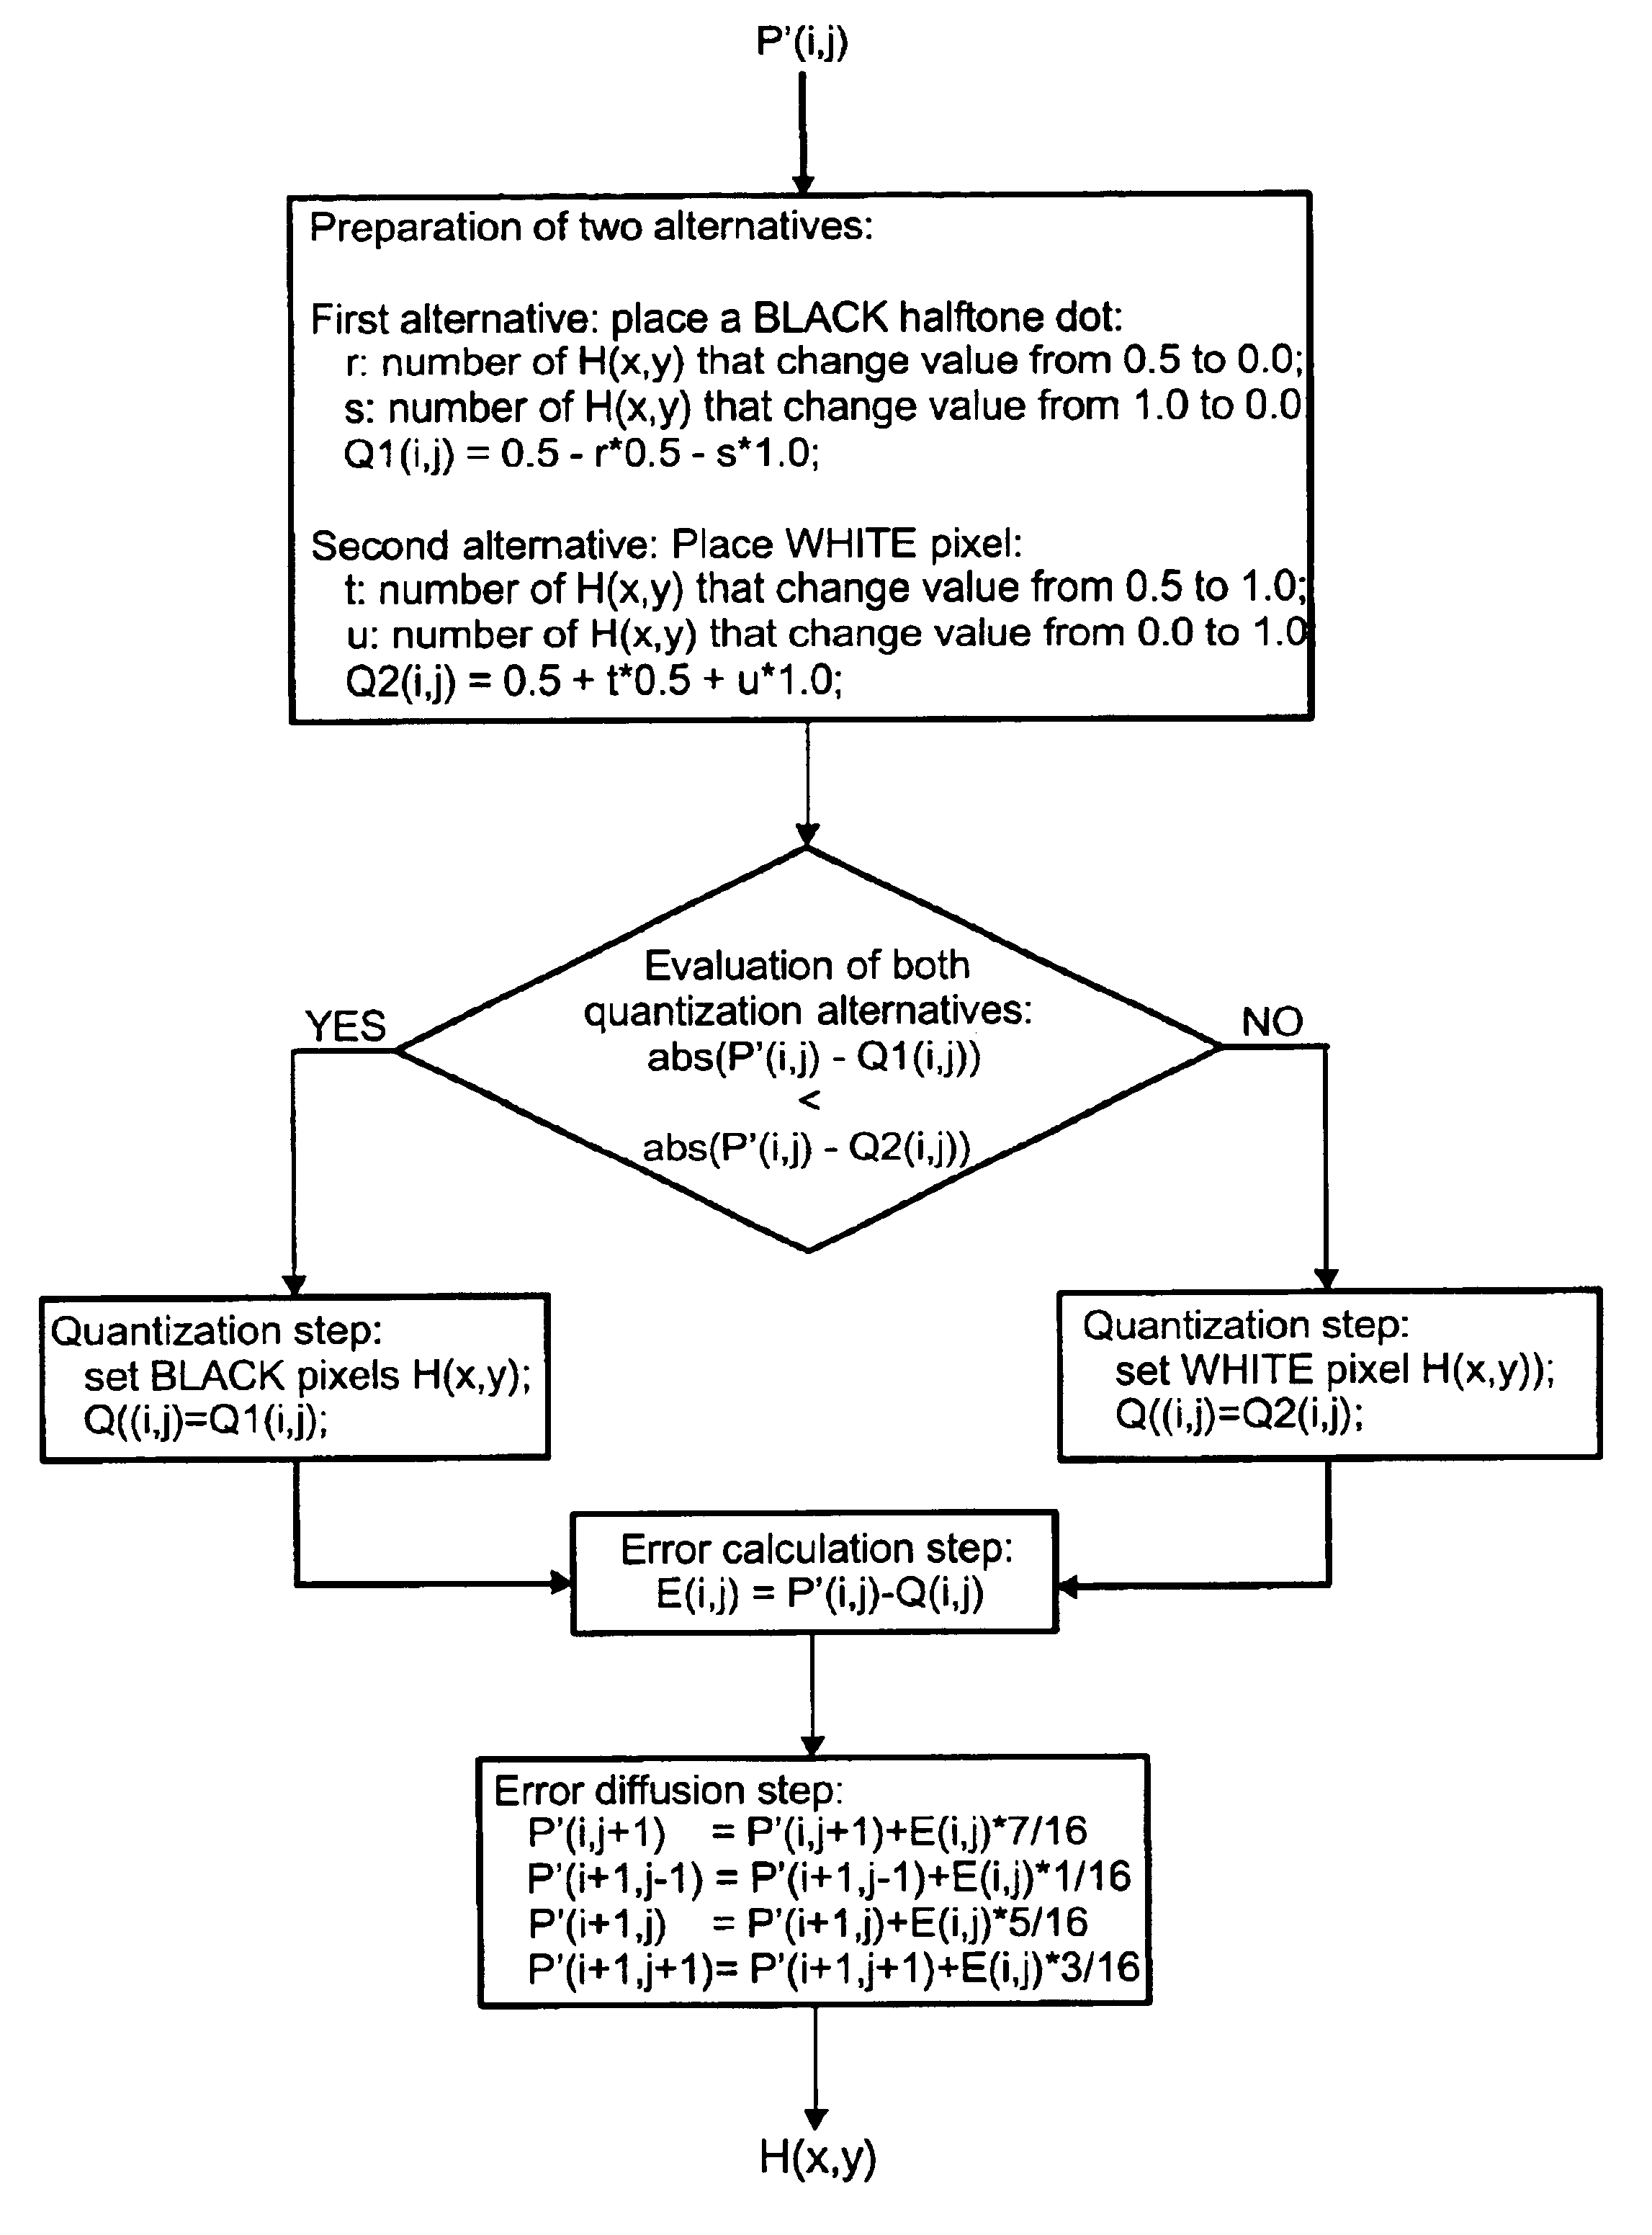 Sub-dot phase modulation for computer to plate inkjet system